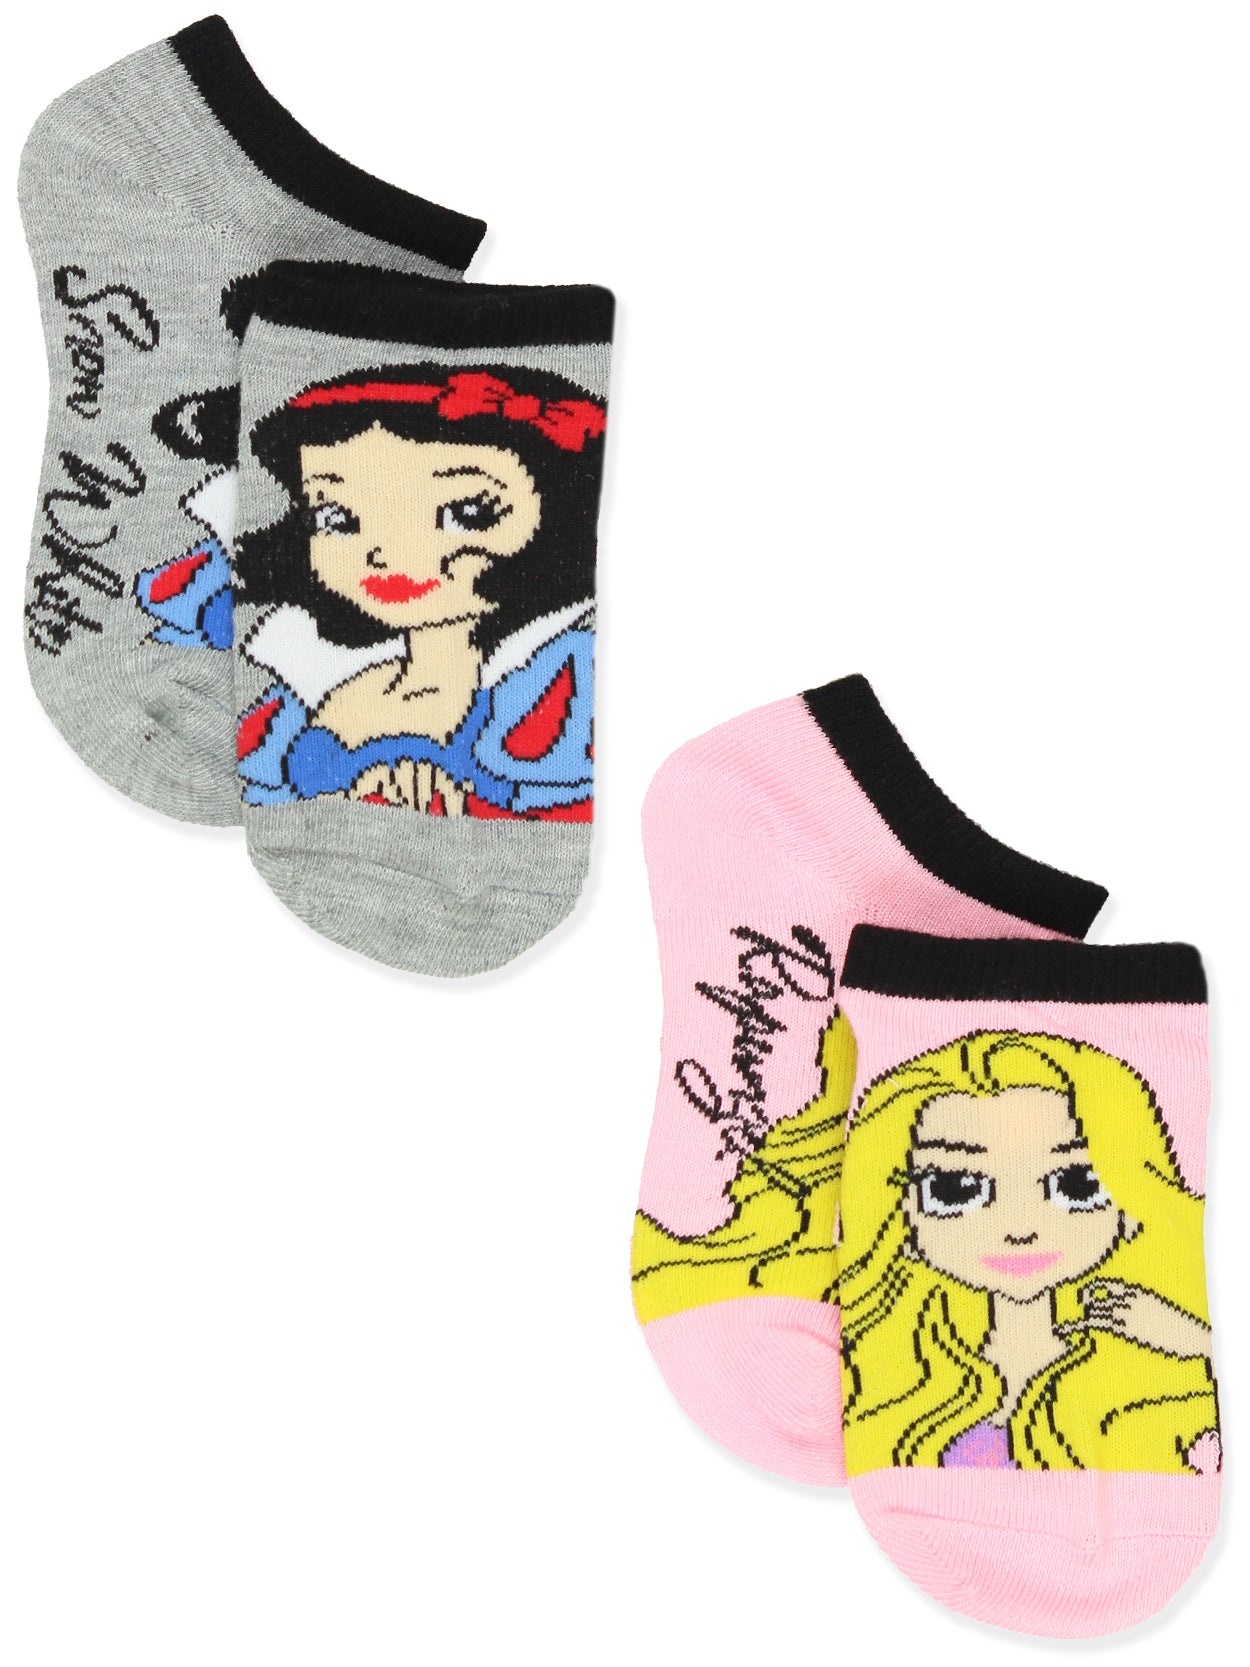 Disney Princess Toddler Girls 6 Pack Socks with Grippers (Small (4